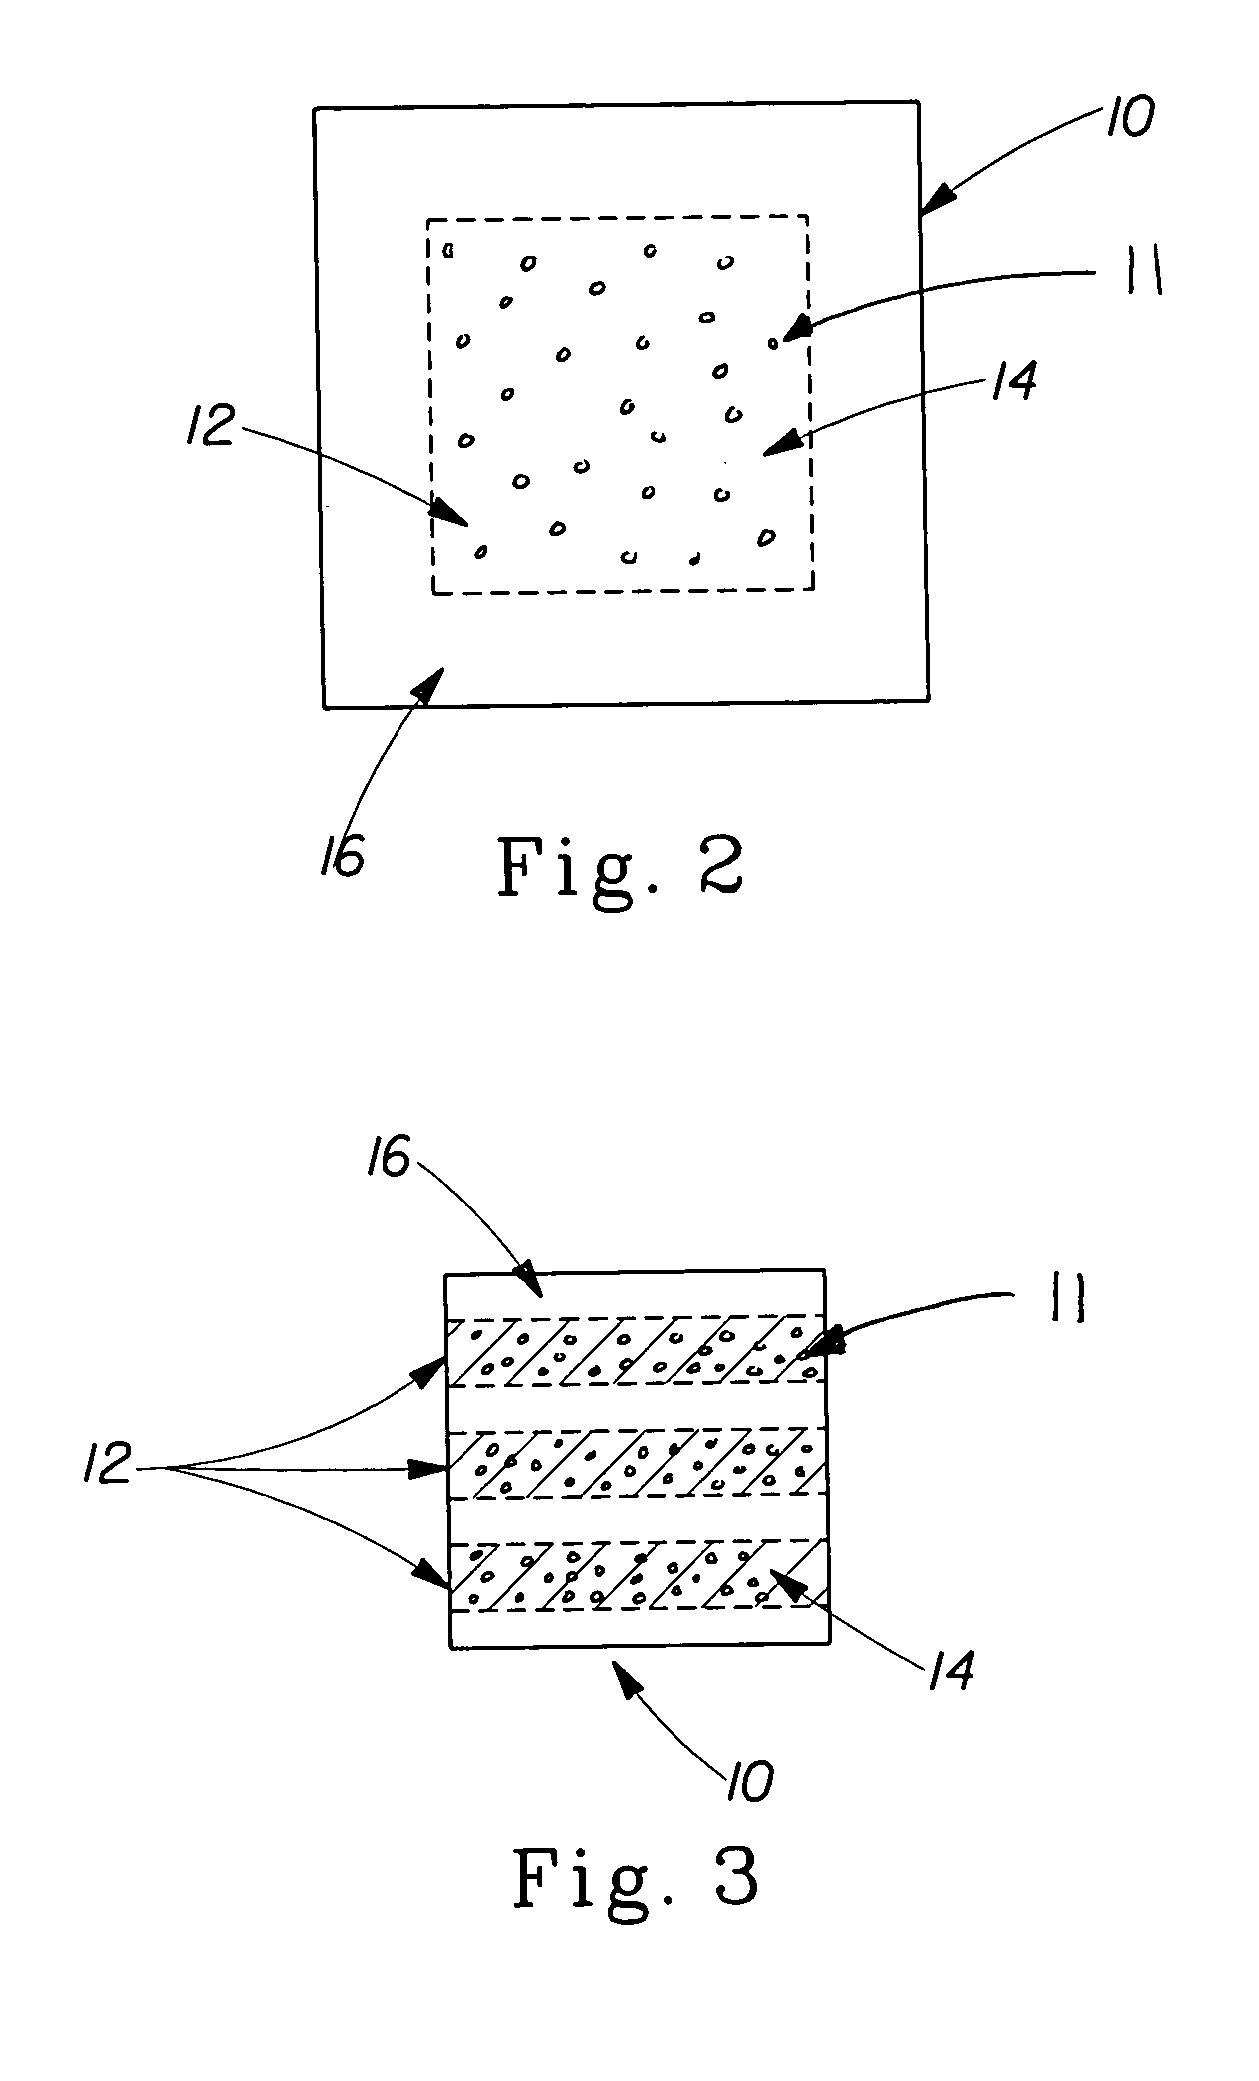 Breathable absorbent articles and composites comprising a vapor permeable, liquid barrier layer with thickening capabilities